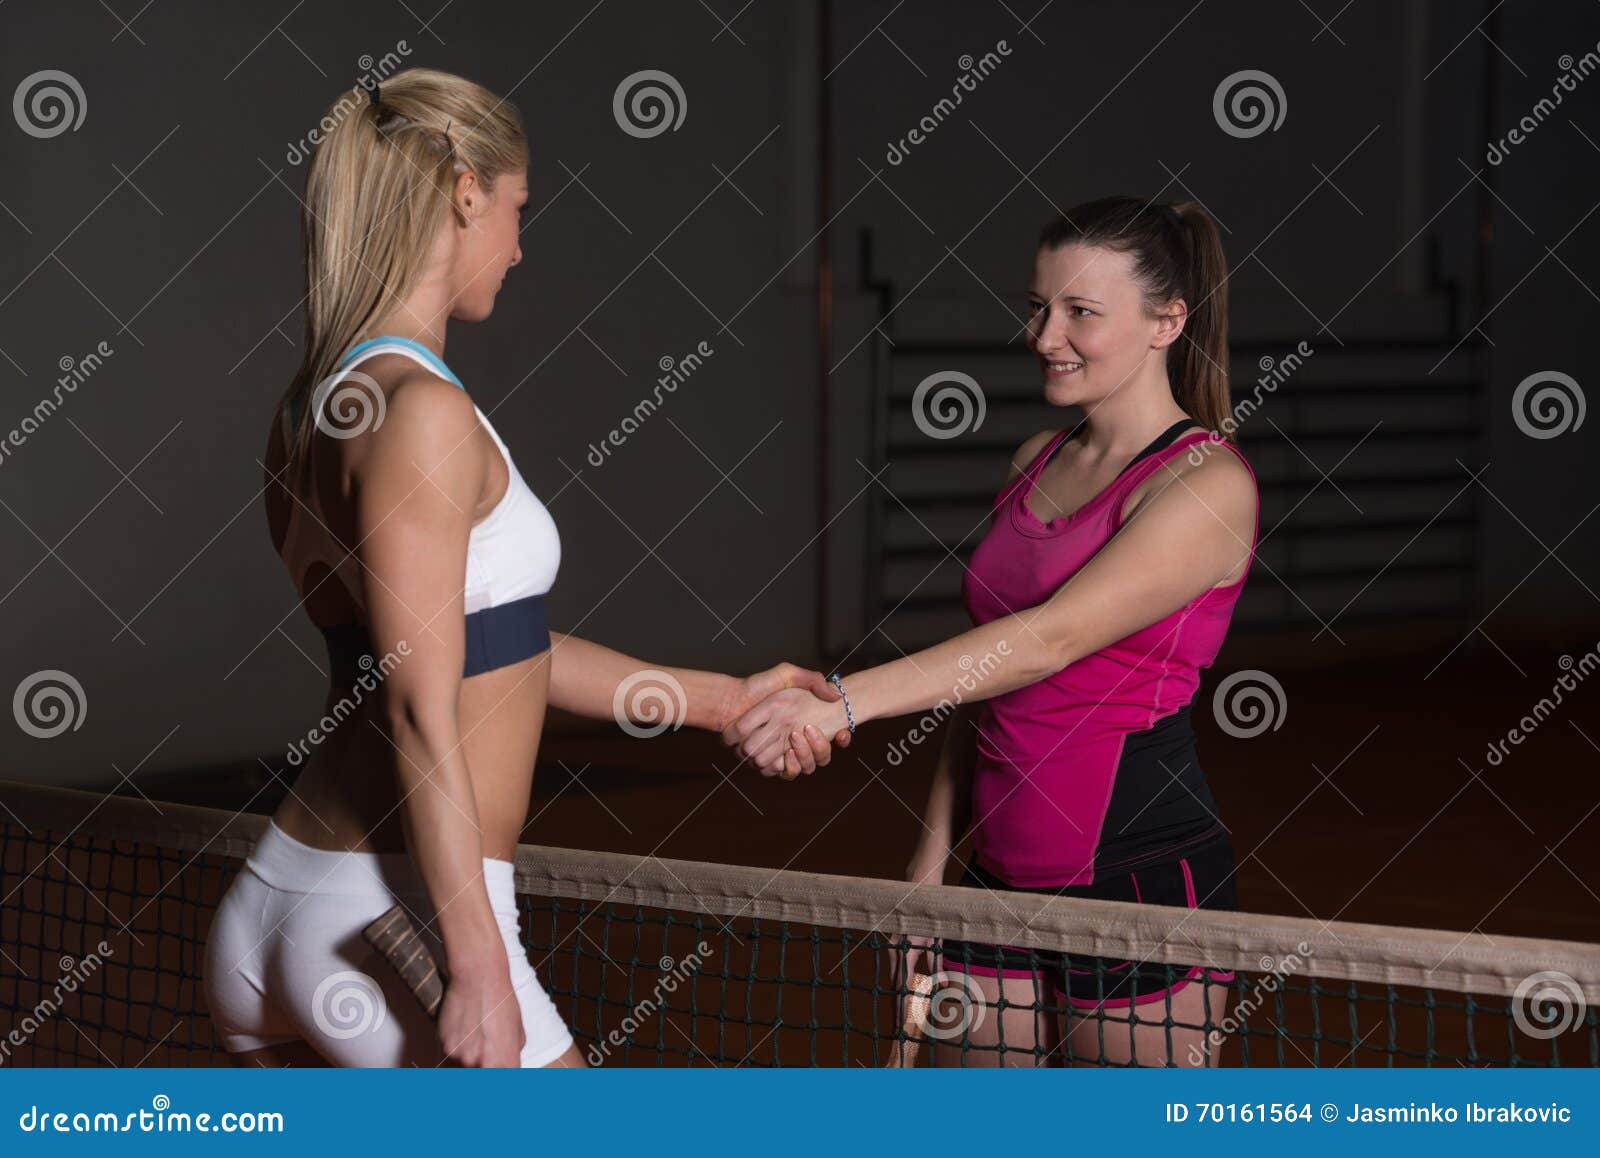 two tennis players shaking hands over the net